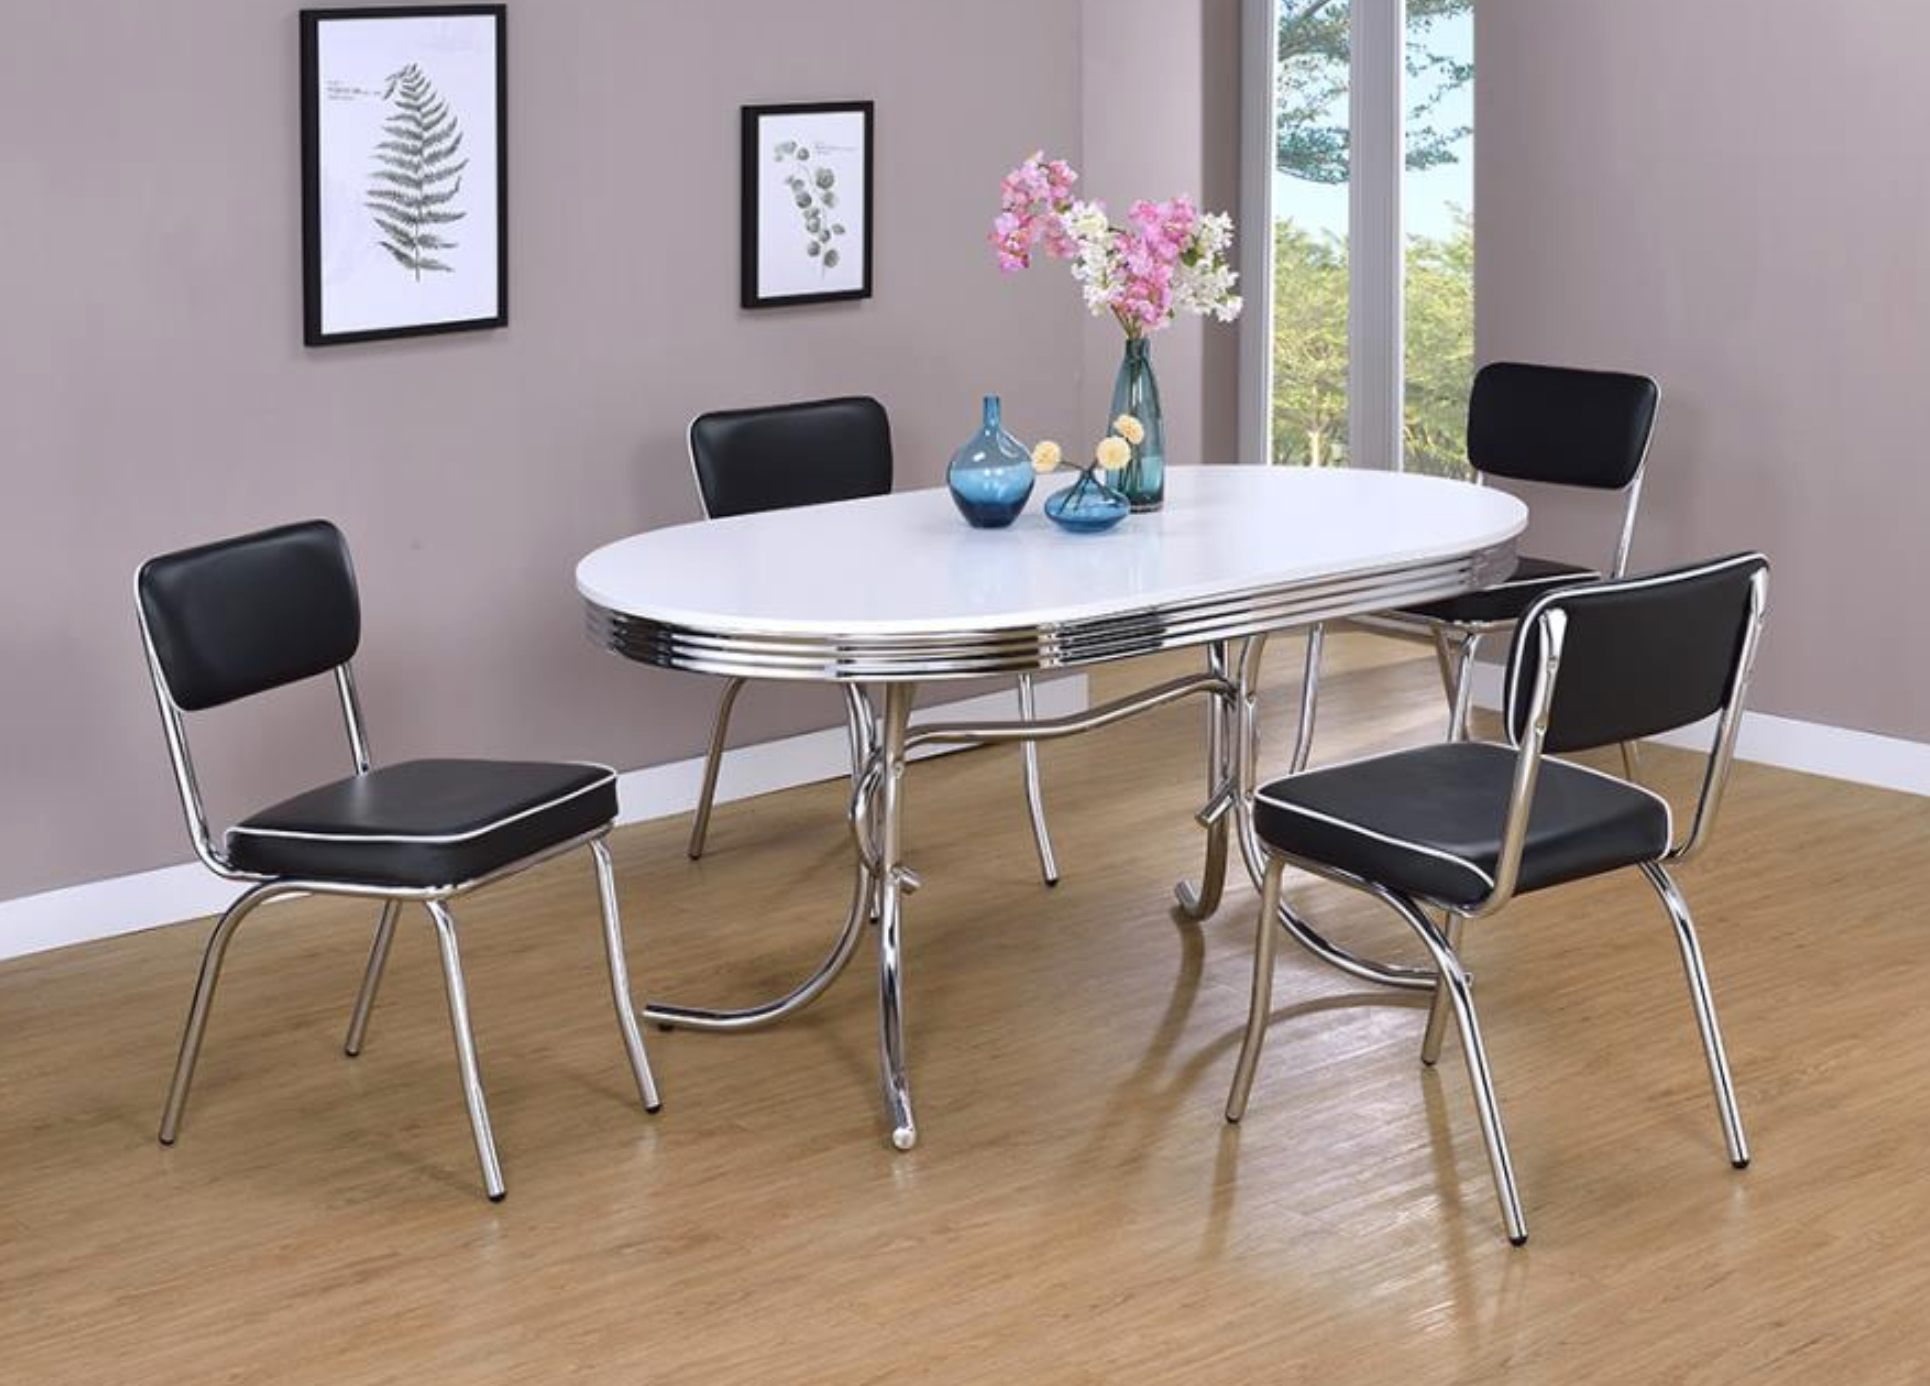 Table Set with Black Chairs